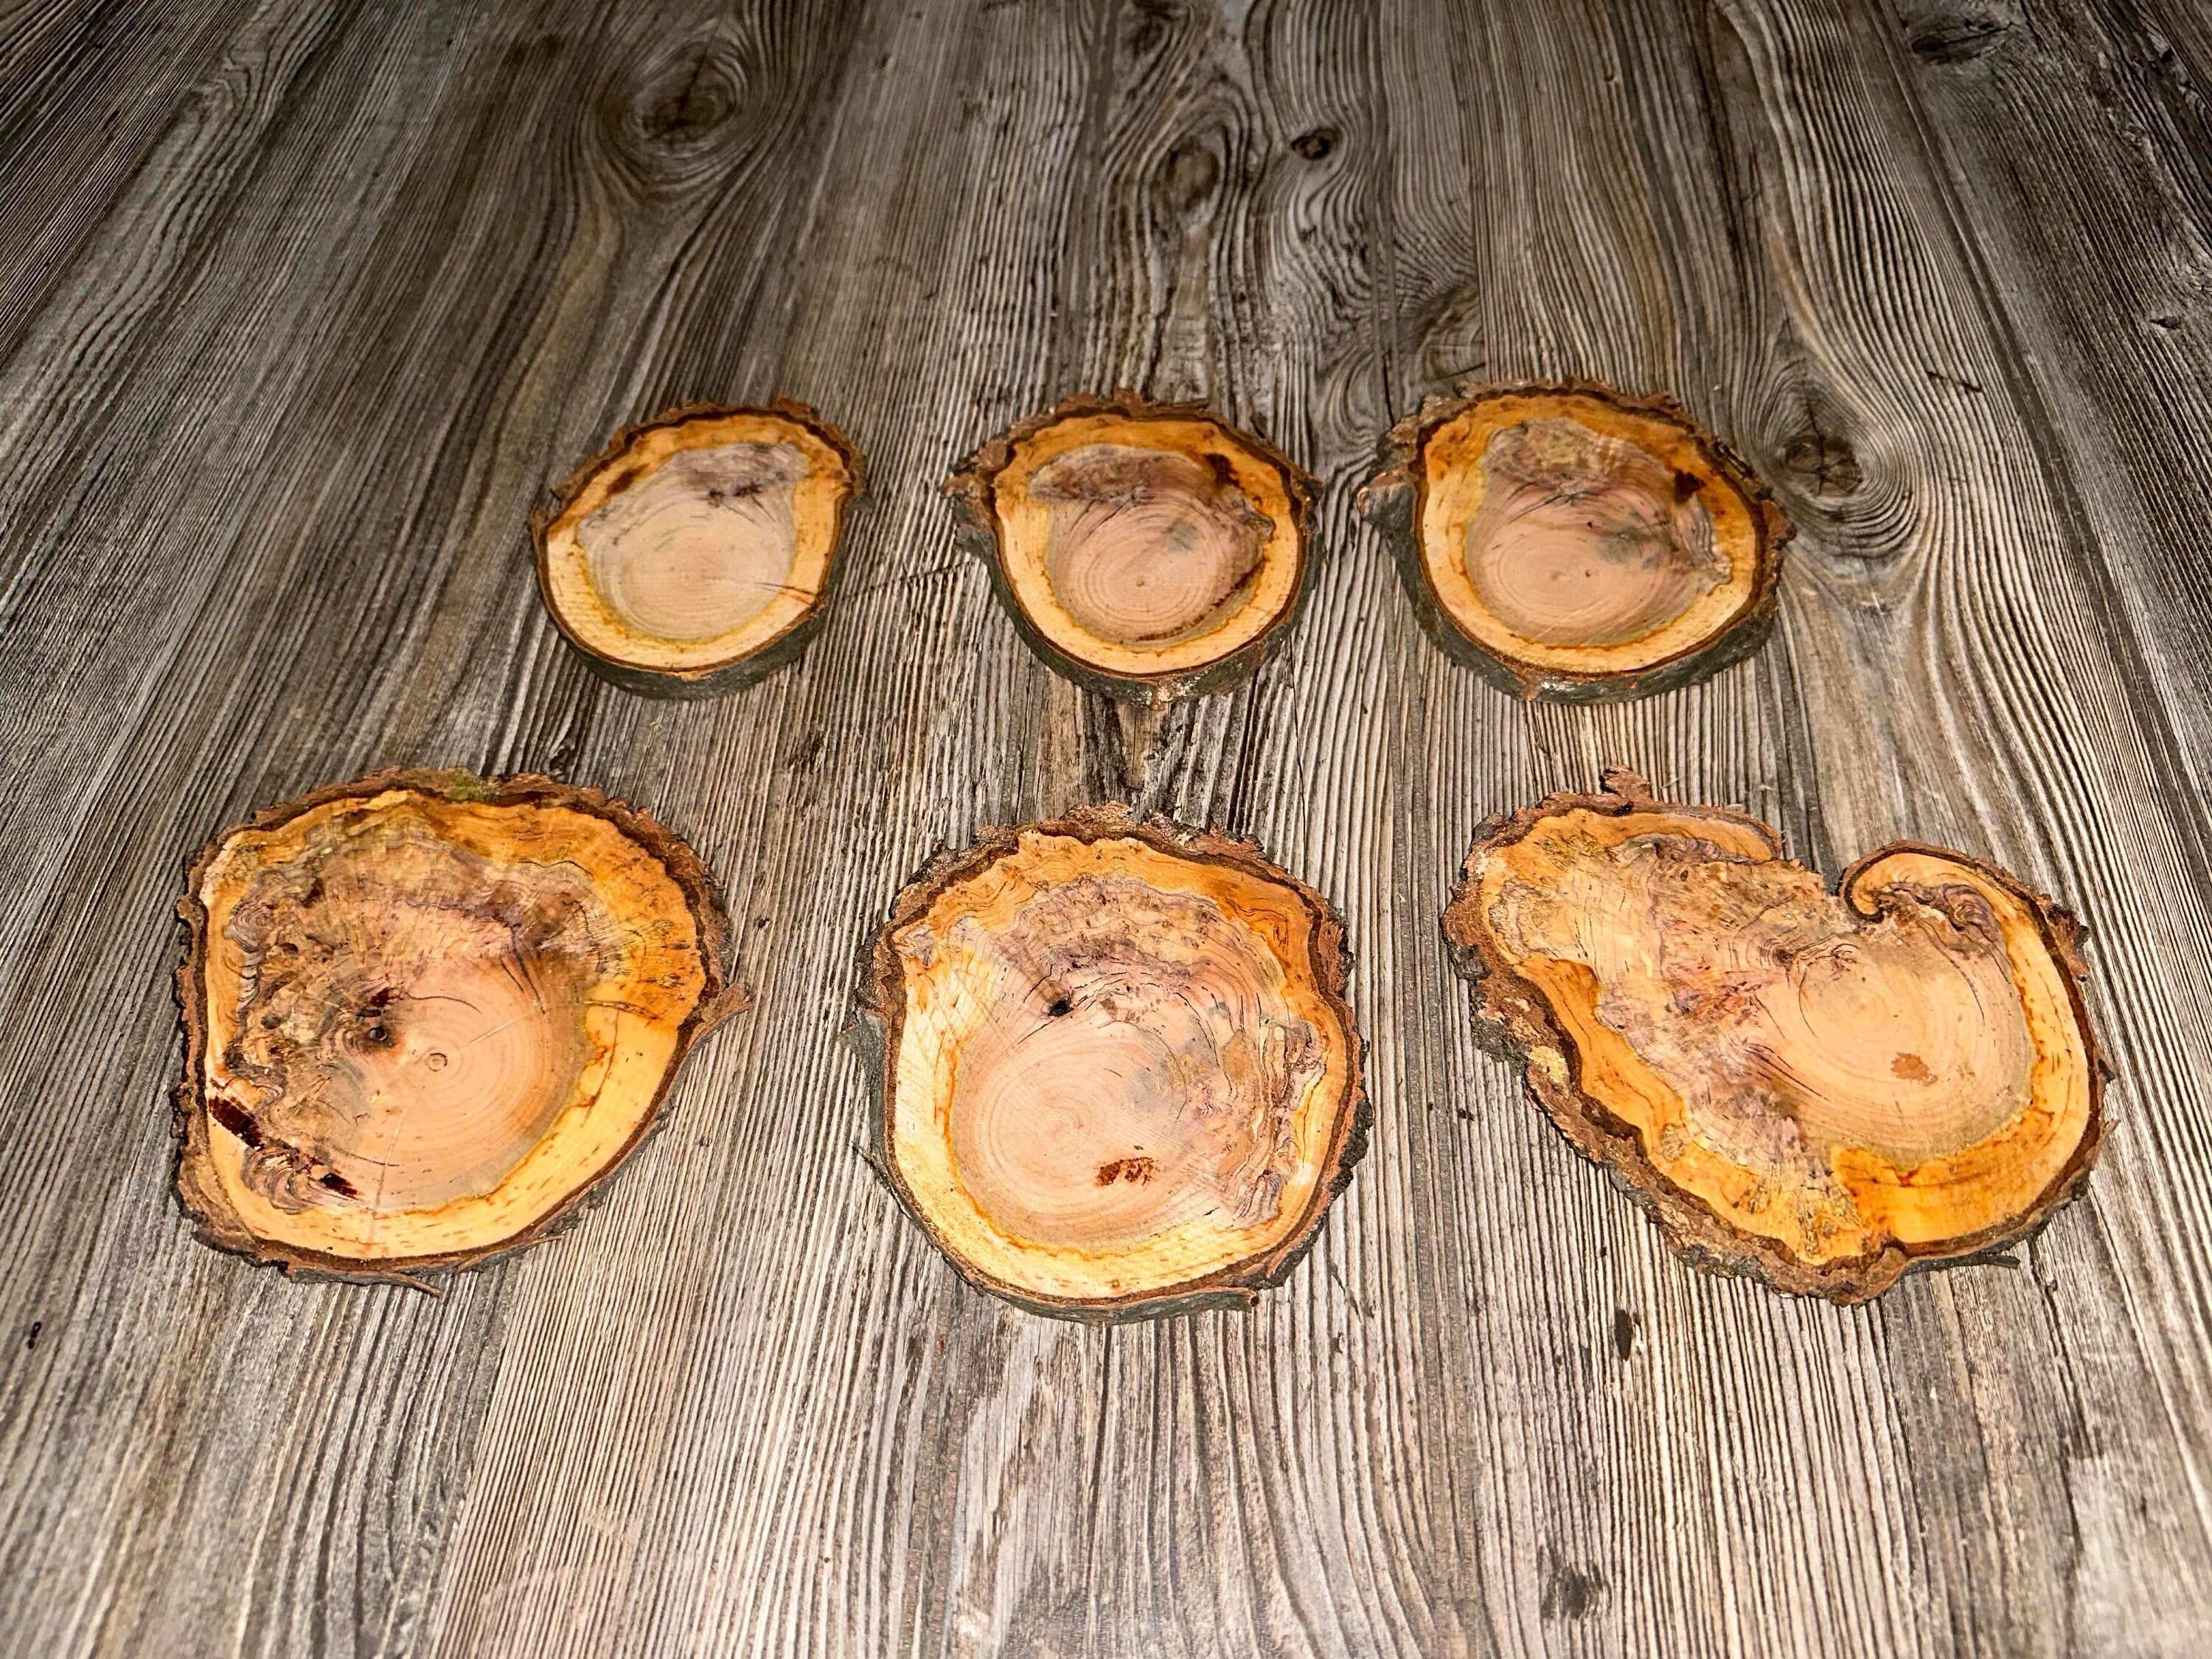 Five Cherry Burl Slices, Approximately 4.5-6 Inches Long by 4-5 Inches Wide and 1/2 Inch Thick